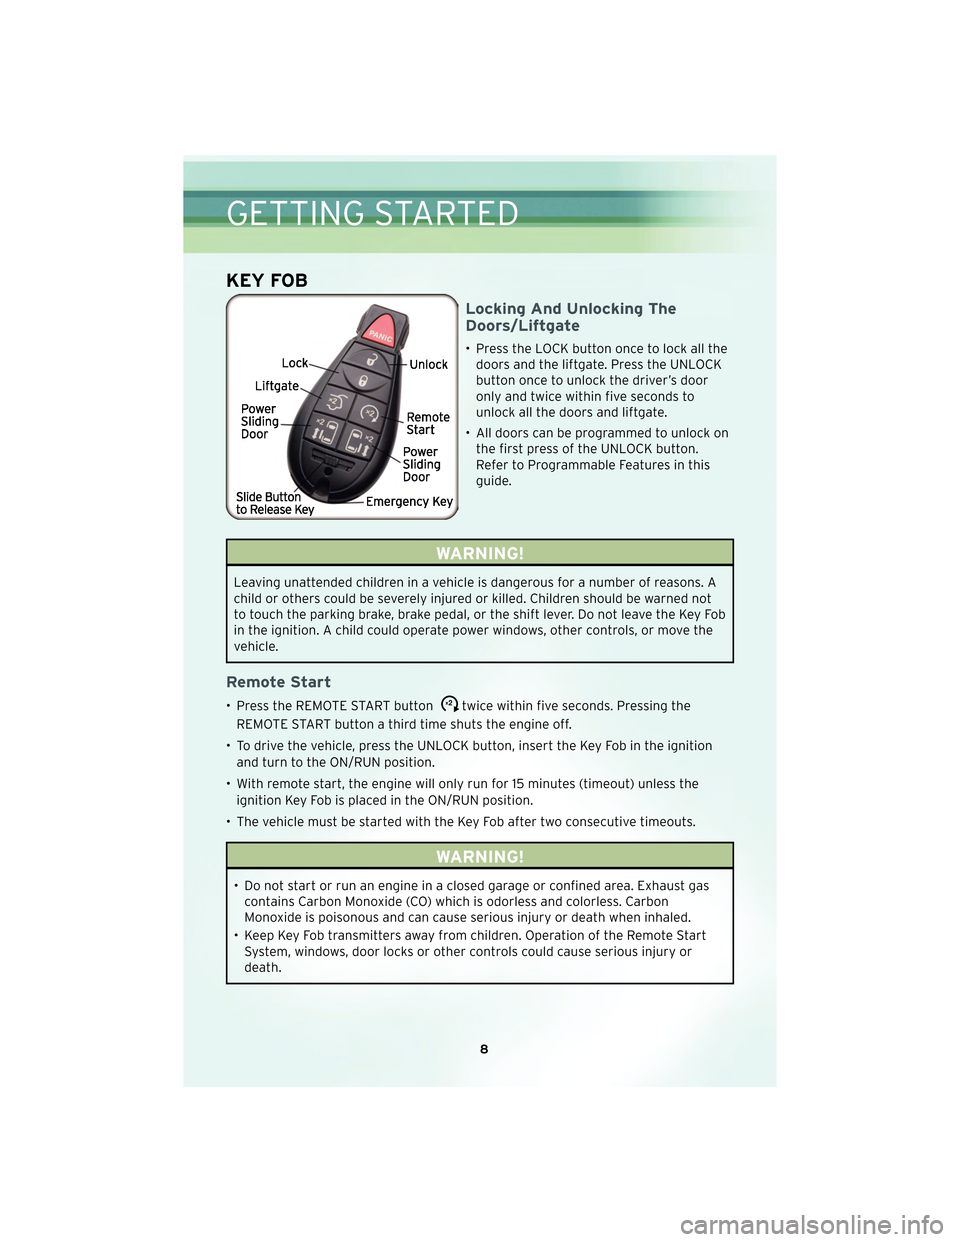 CHRYSLER TOWN AND COUNTRY 2010 5.G User Guide KEY FOB
Locking And Unlocking The
Doors/Liftgate
• Press the LOCK button once to lock all thedoors and the liftgate. Press the UNLOCK
button once to unlock the driver’s door
only and twice within 